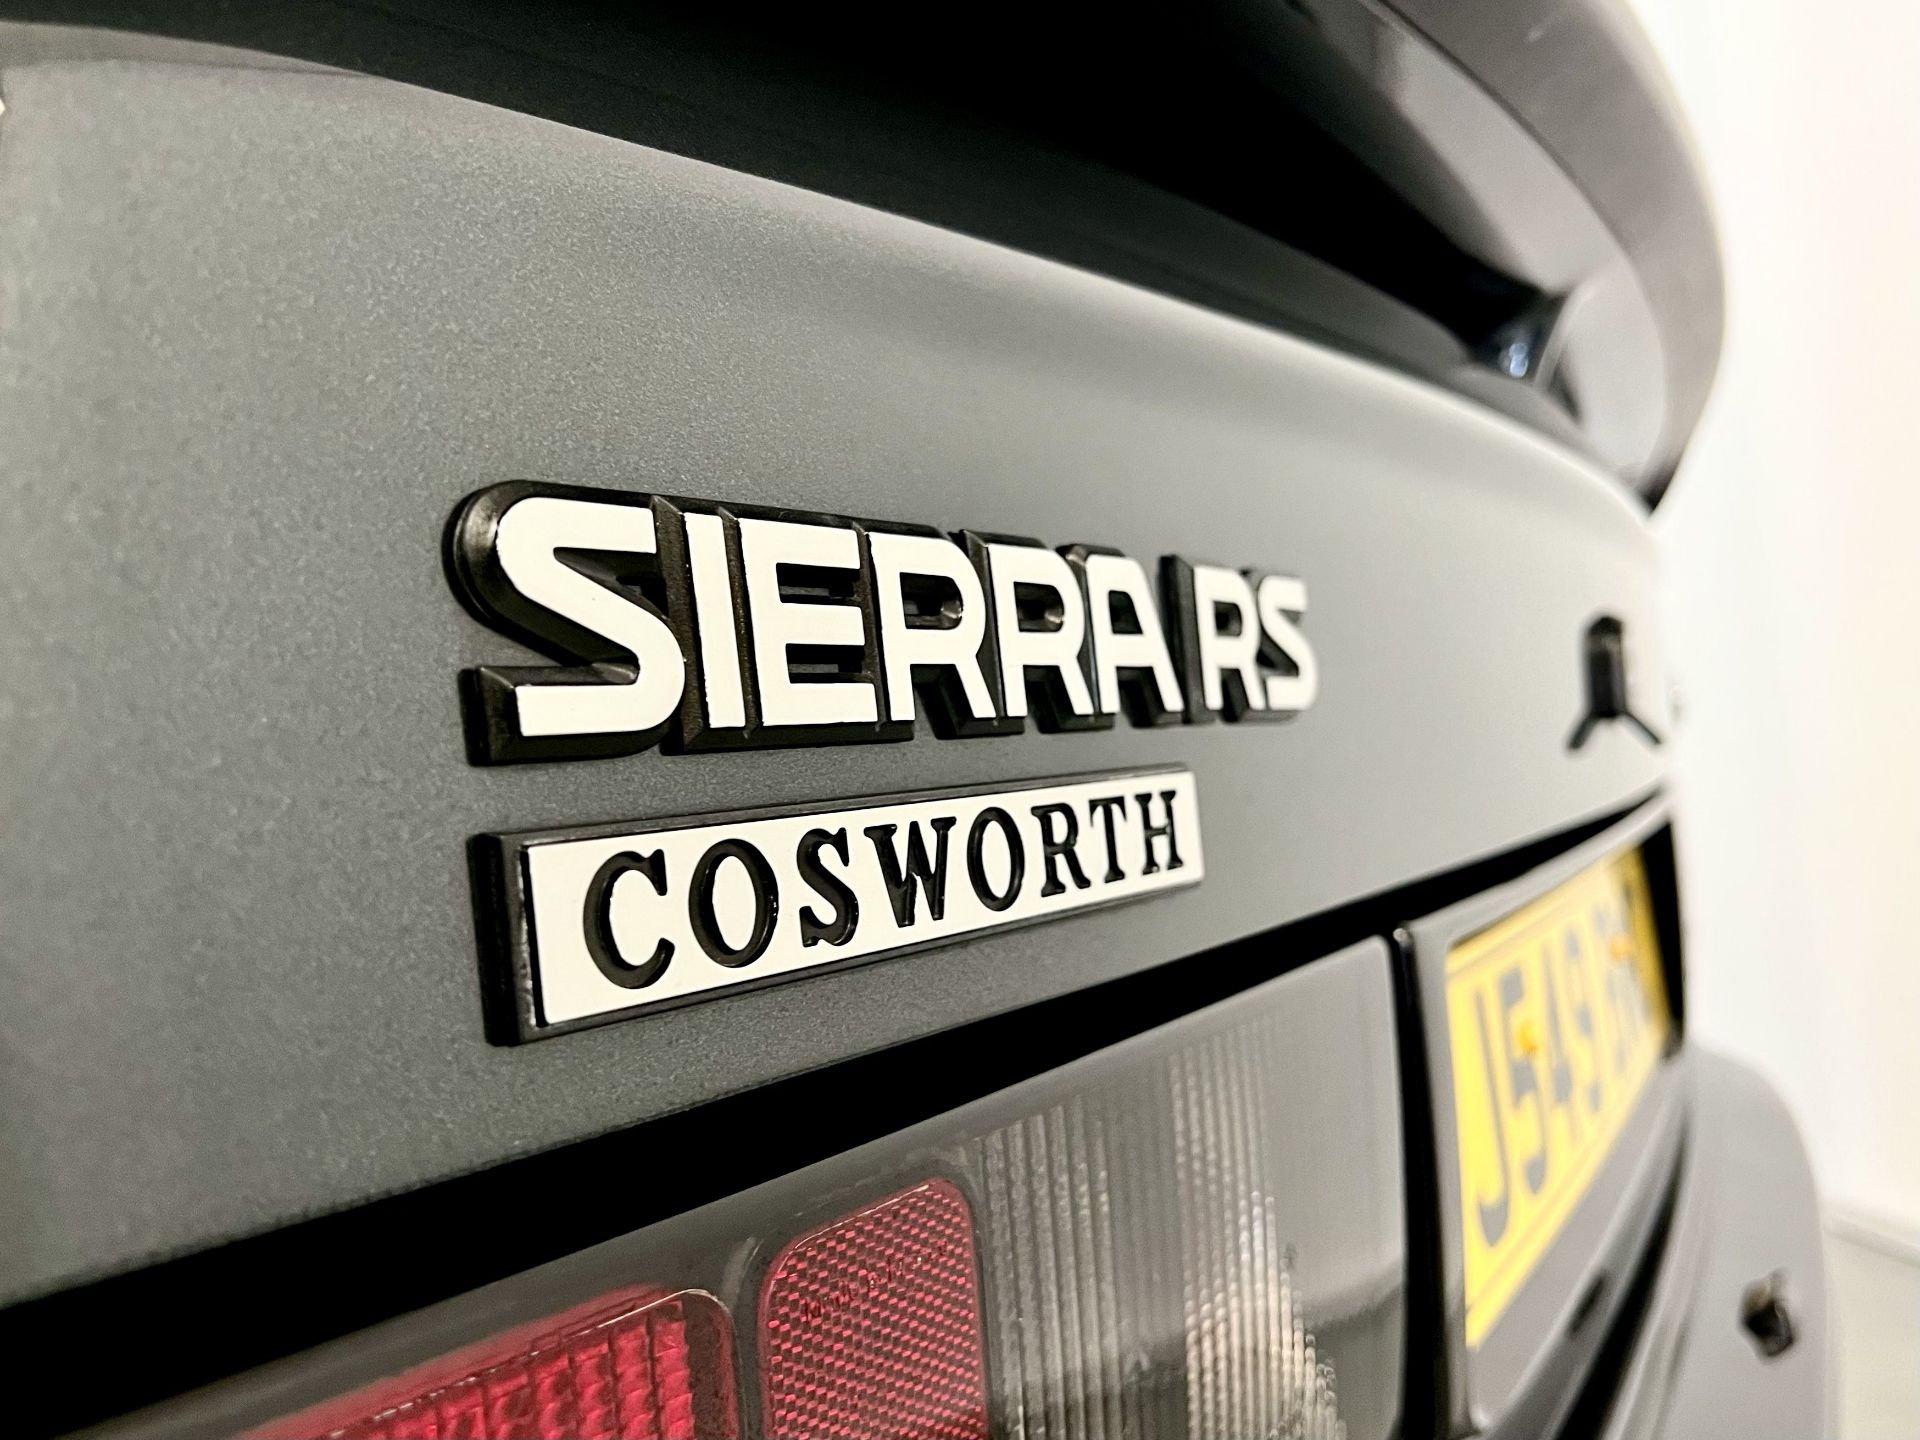 Ford Sierra Sapphire Cosworth - Image 17 of 37